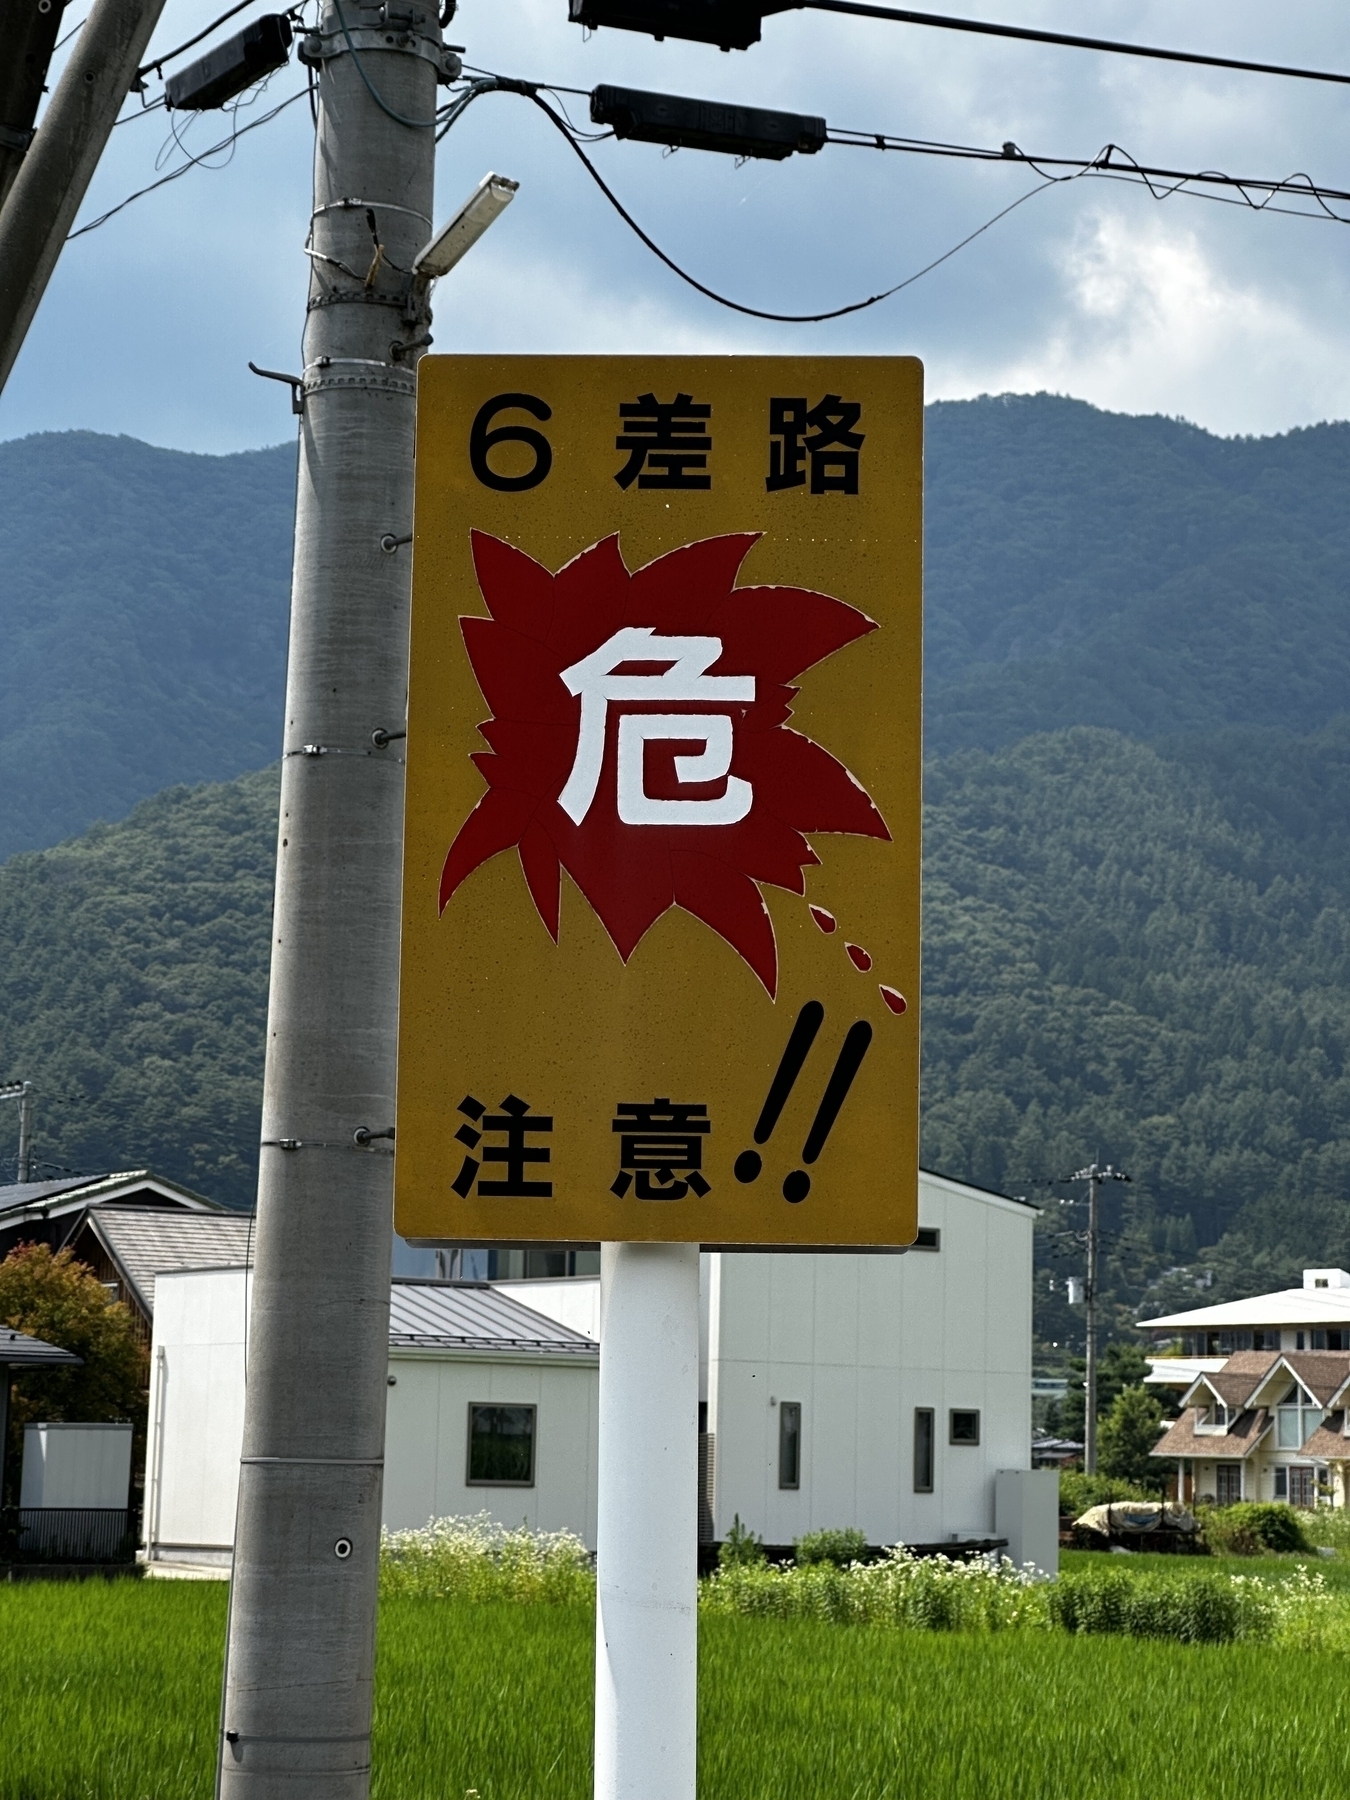 Sign in Japanese. What does this sign mean? Looks like explosions and exclamation points.